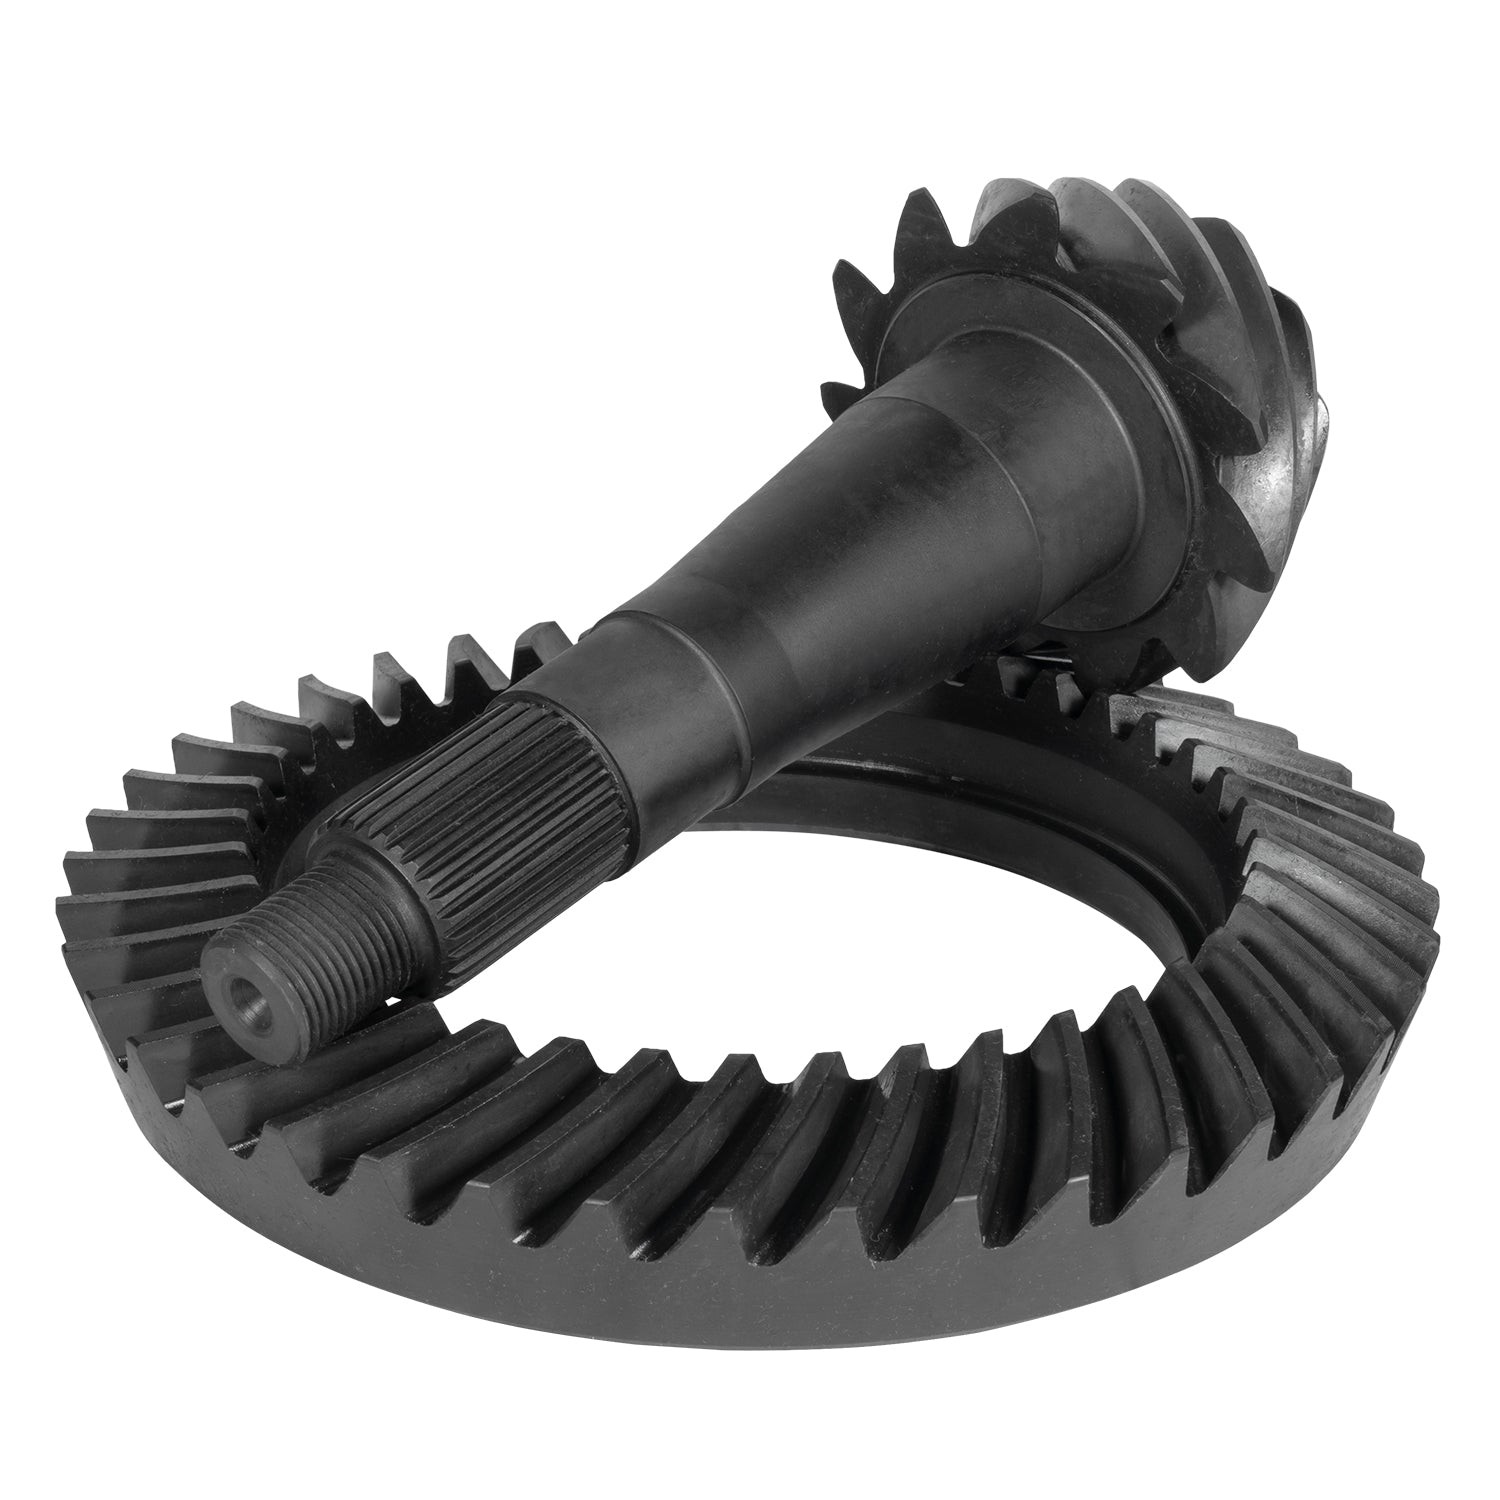 Yukon Gear Chrysler Dodge Plymouth Differential Ring and Pinion Kit - Rear YGK2344